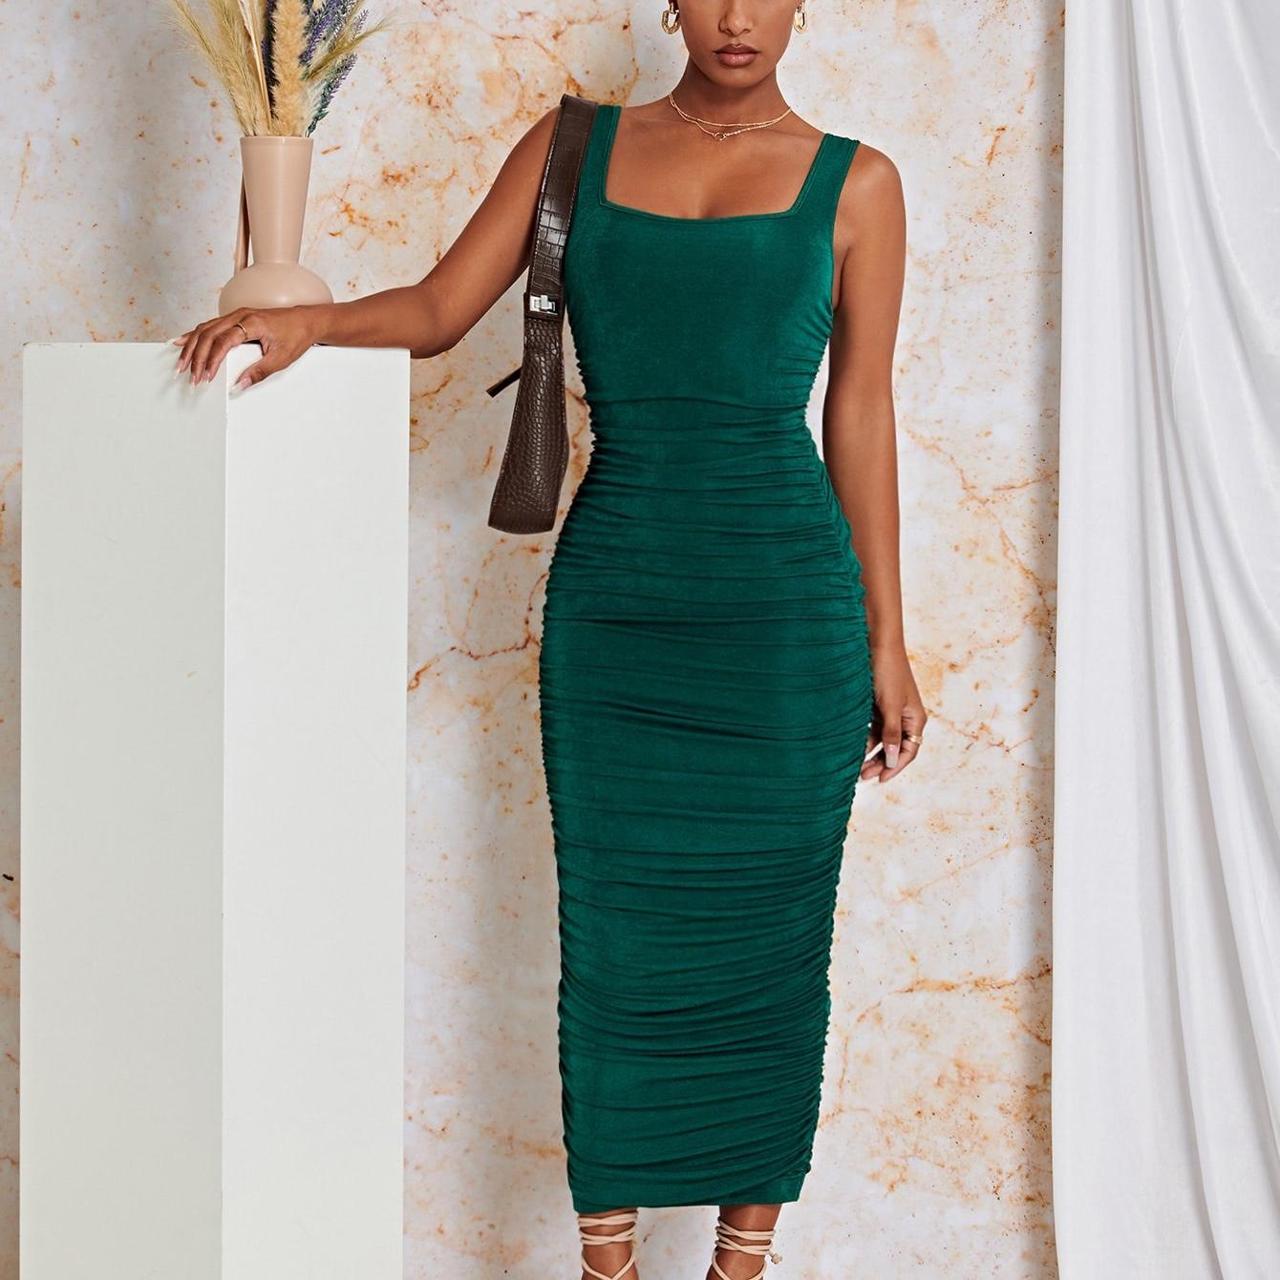 Green Runched Side Body On Dress From Shein<3,, Shein Green Dresses